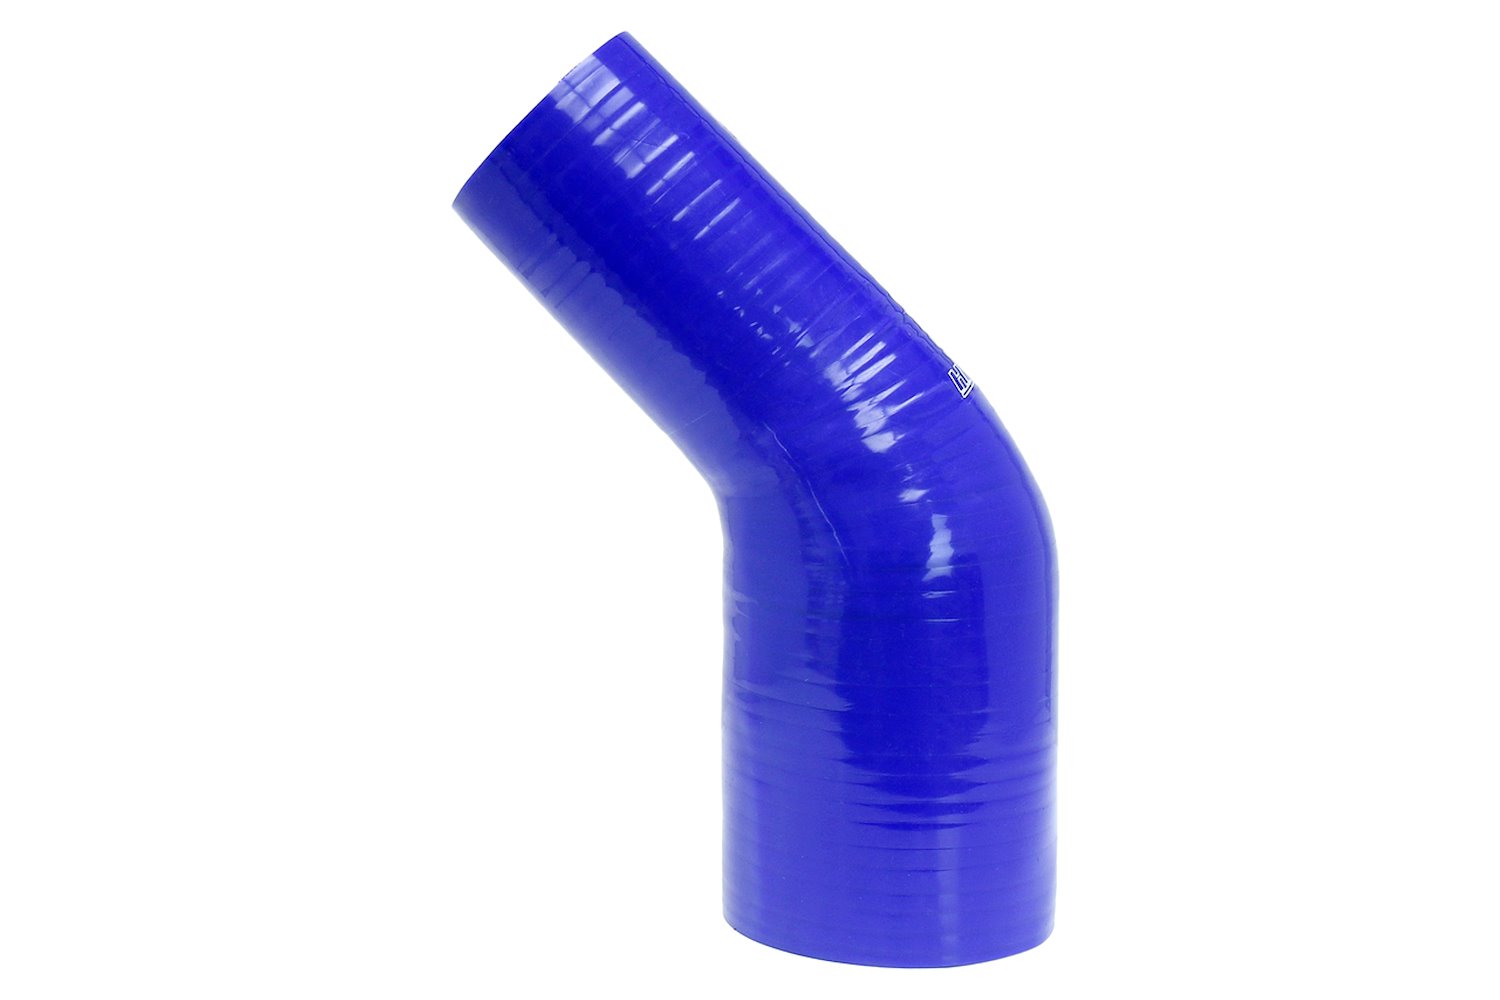 HTSER45-325-350-BLUE Silicone 45-Degree Elbow Hose, High-Temp 4-Ply Reinforced, 3-1/4 in. - 3-1/2 in. ID, Blue